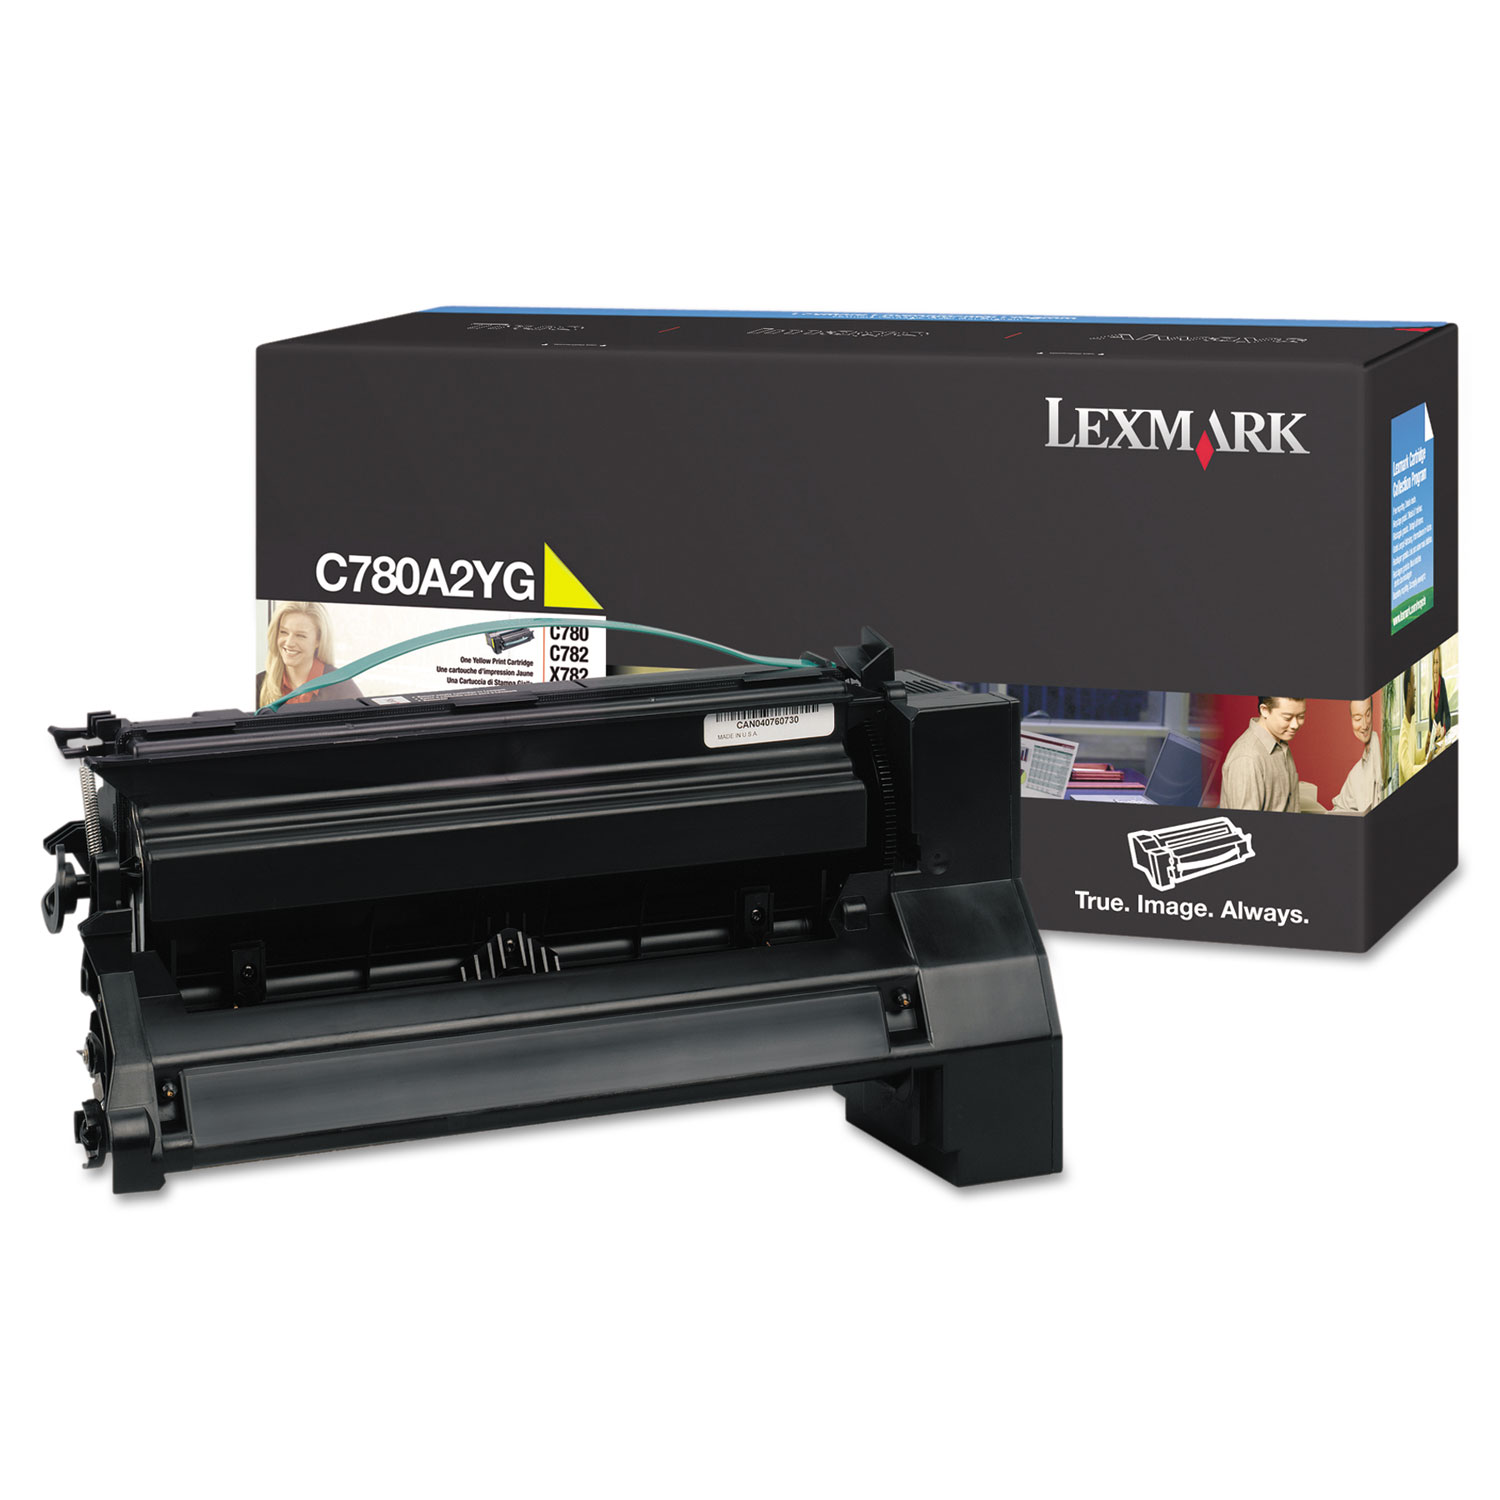 C780A2YG Toner, 6000 Page-Yield, Yellow